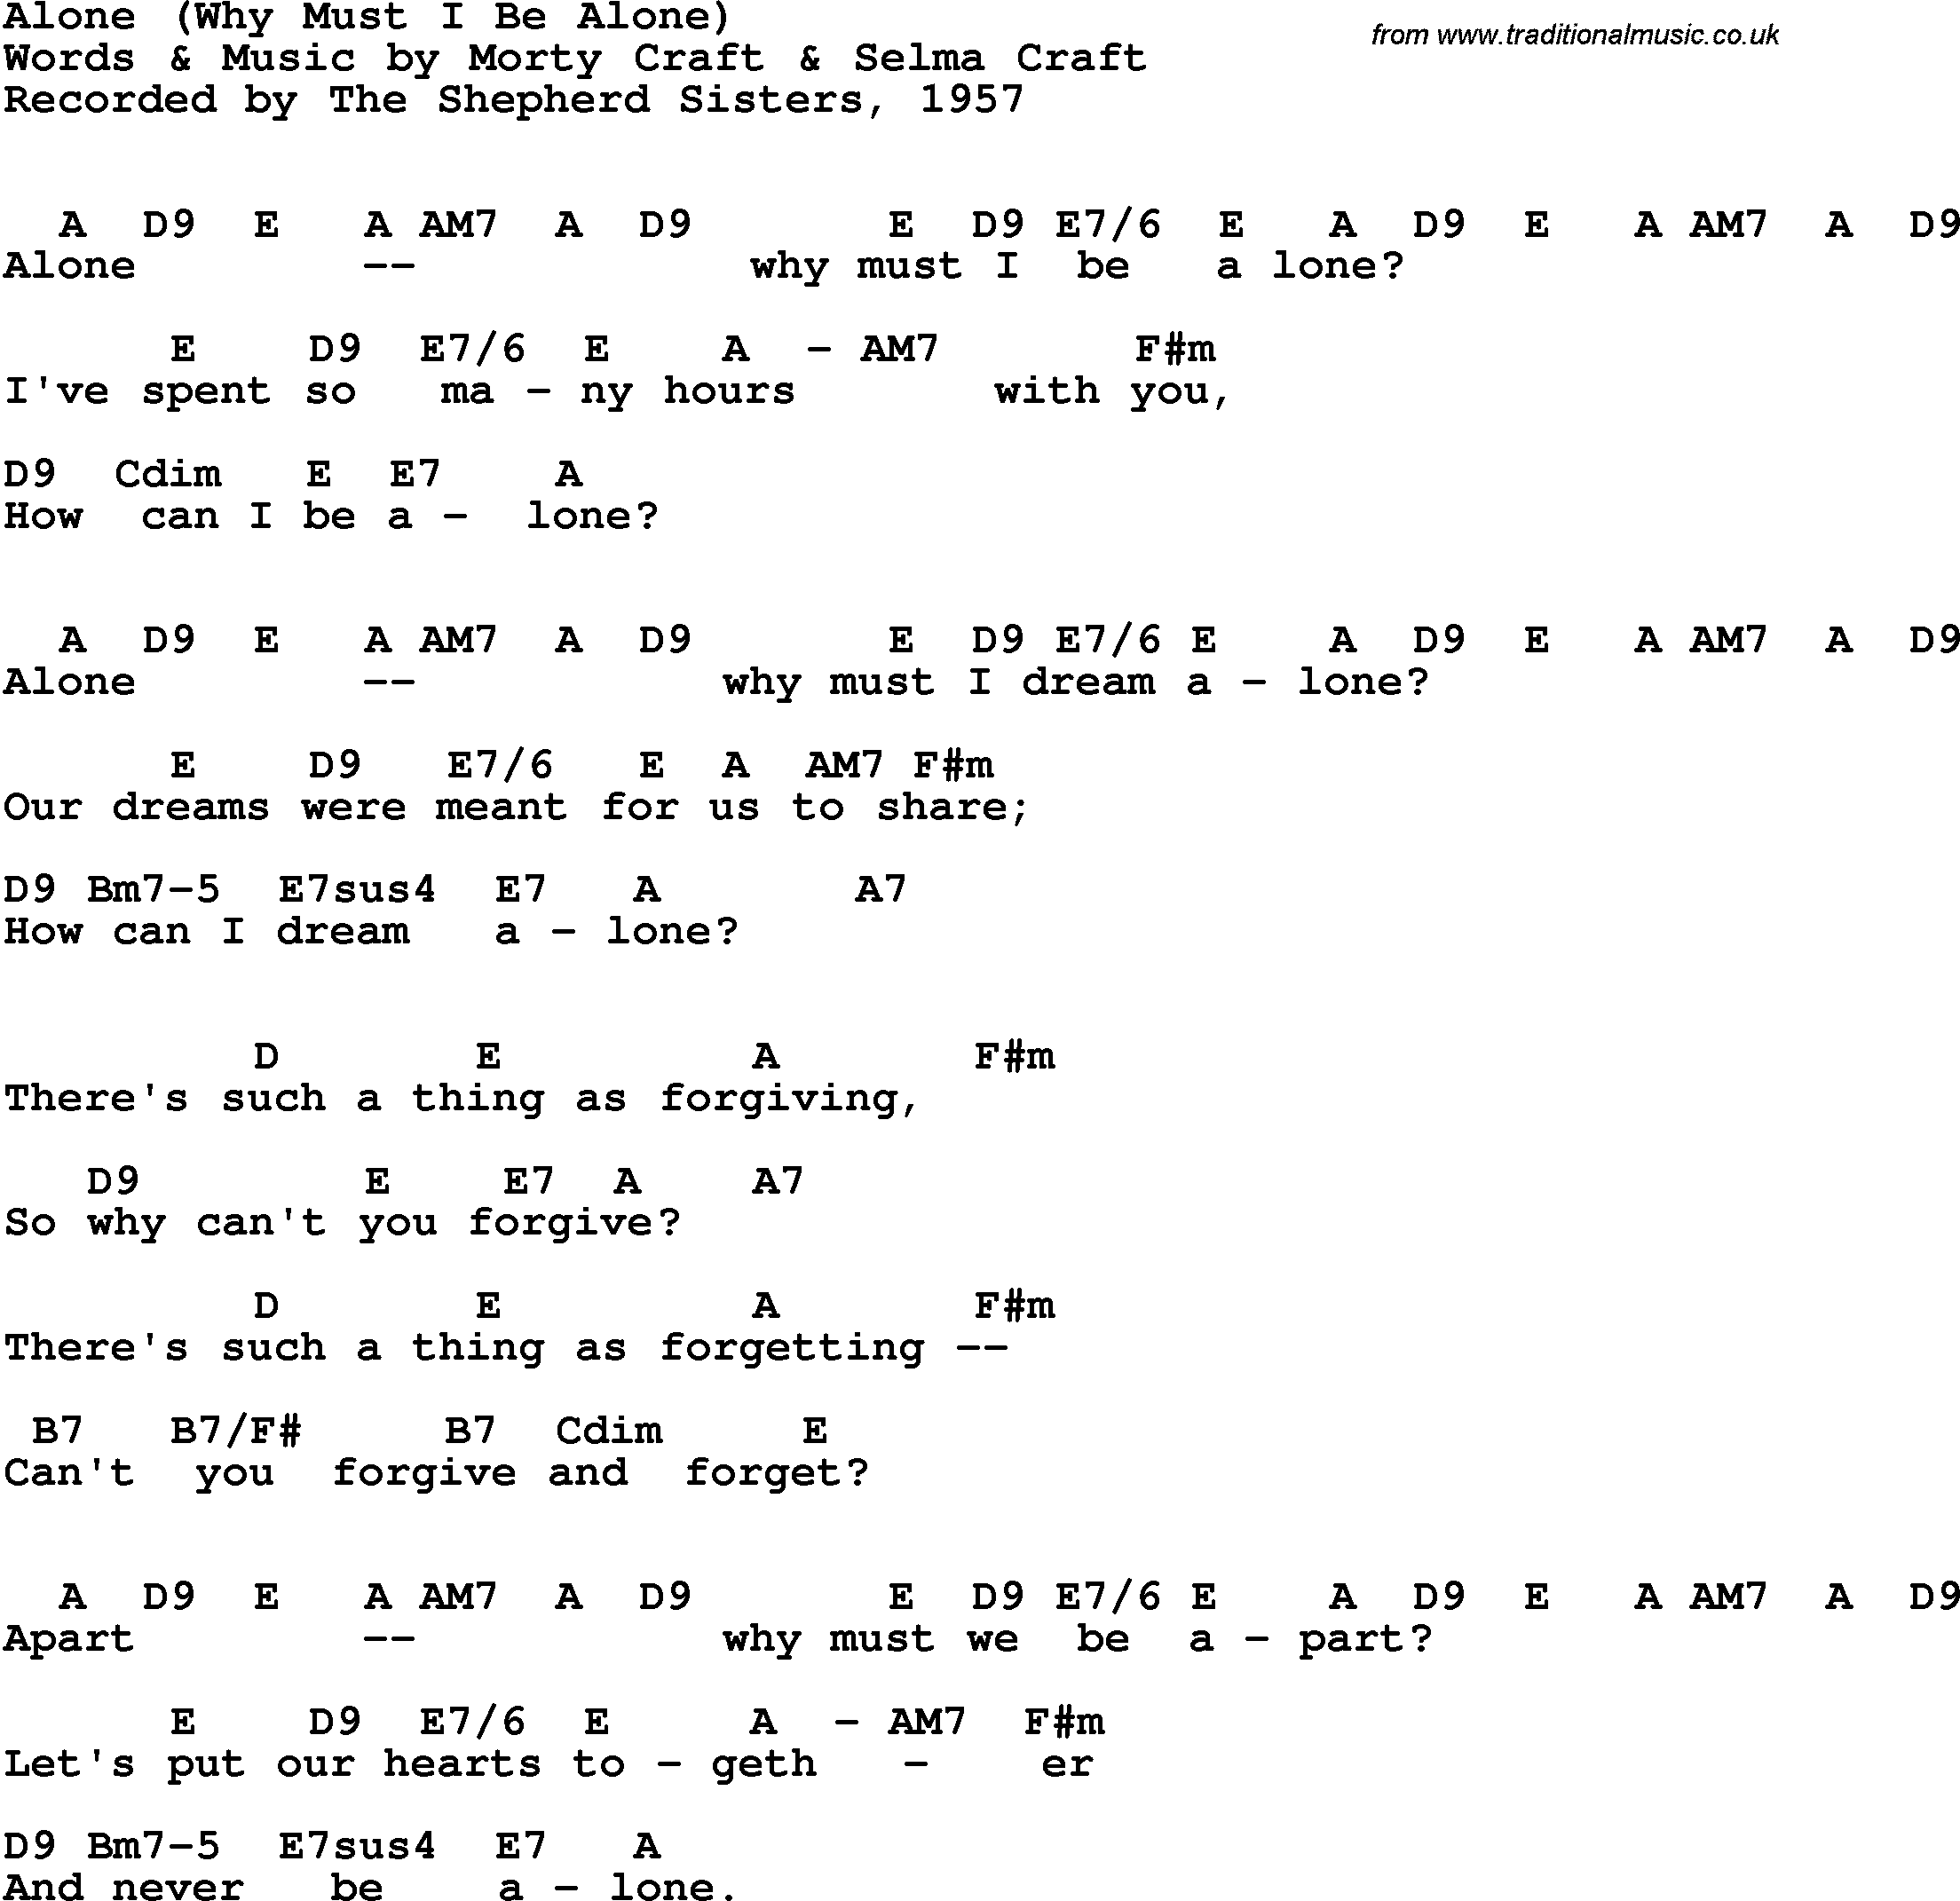 Song Lyrics with guitar chords for Alone (Why Must I Be Alone) - The Shepherd Sisters, 1957